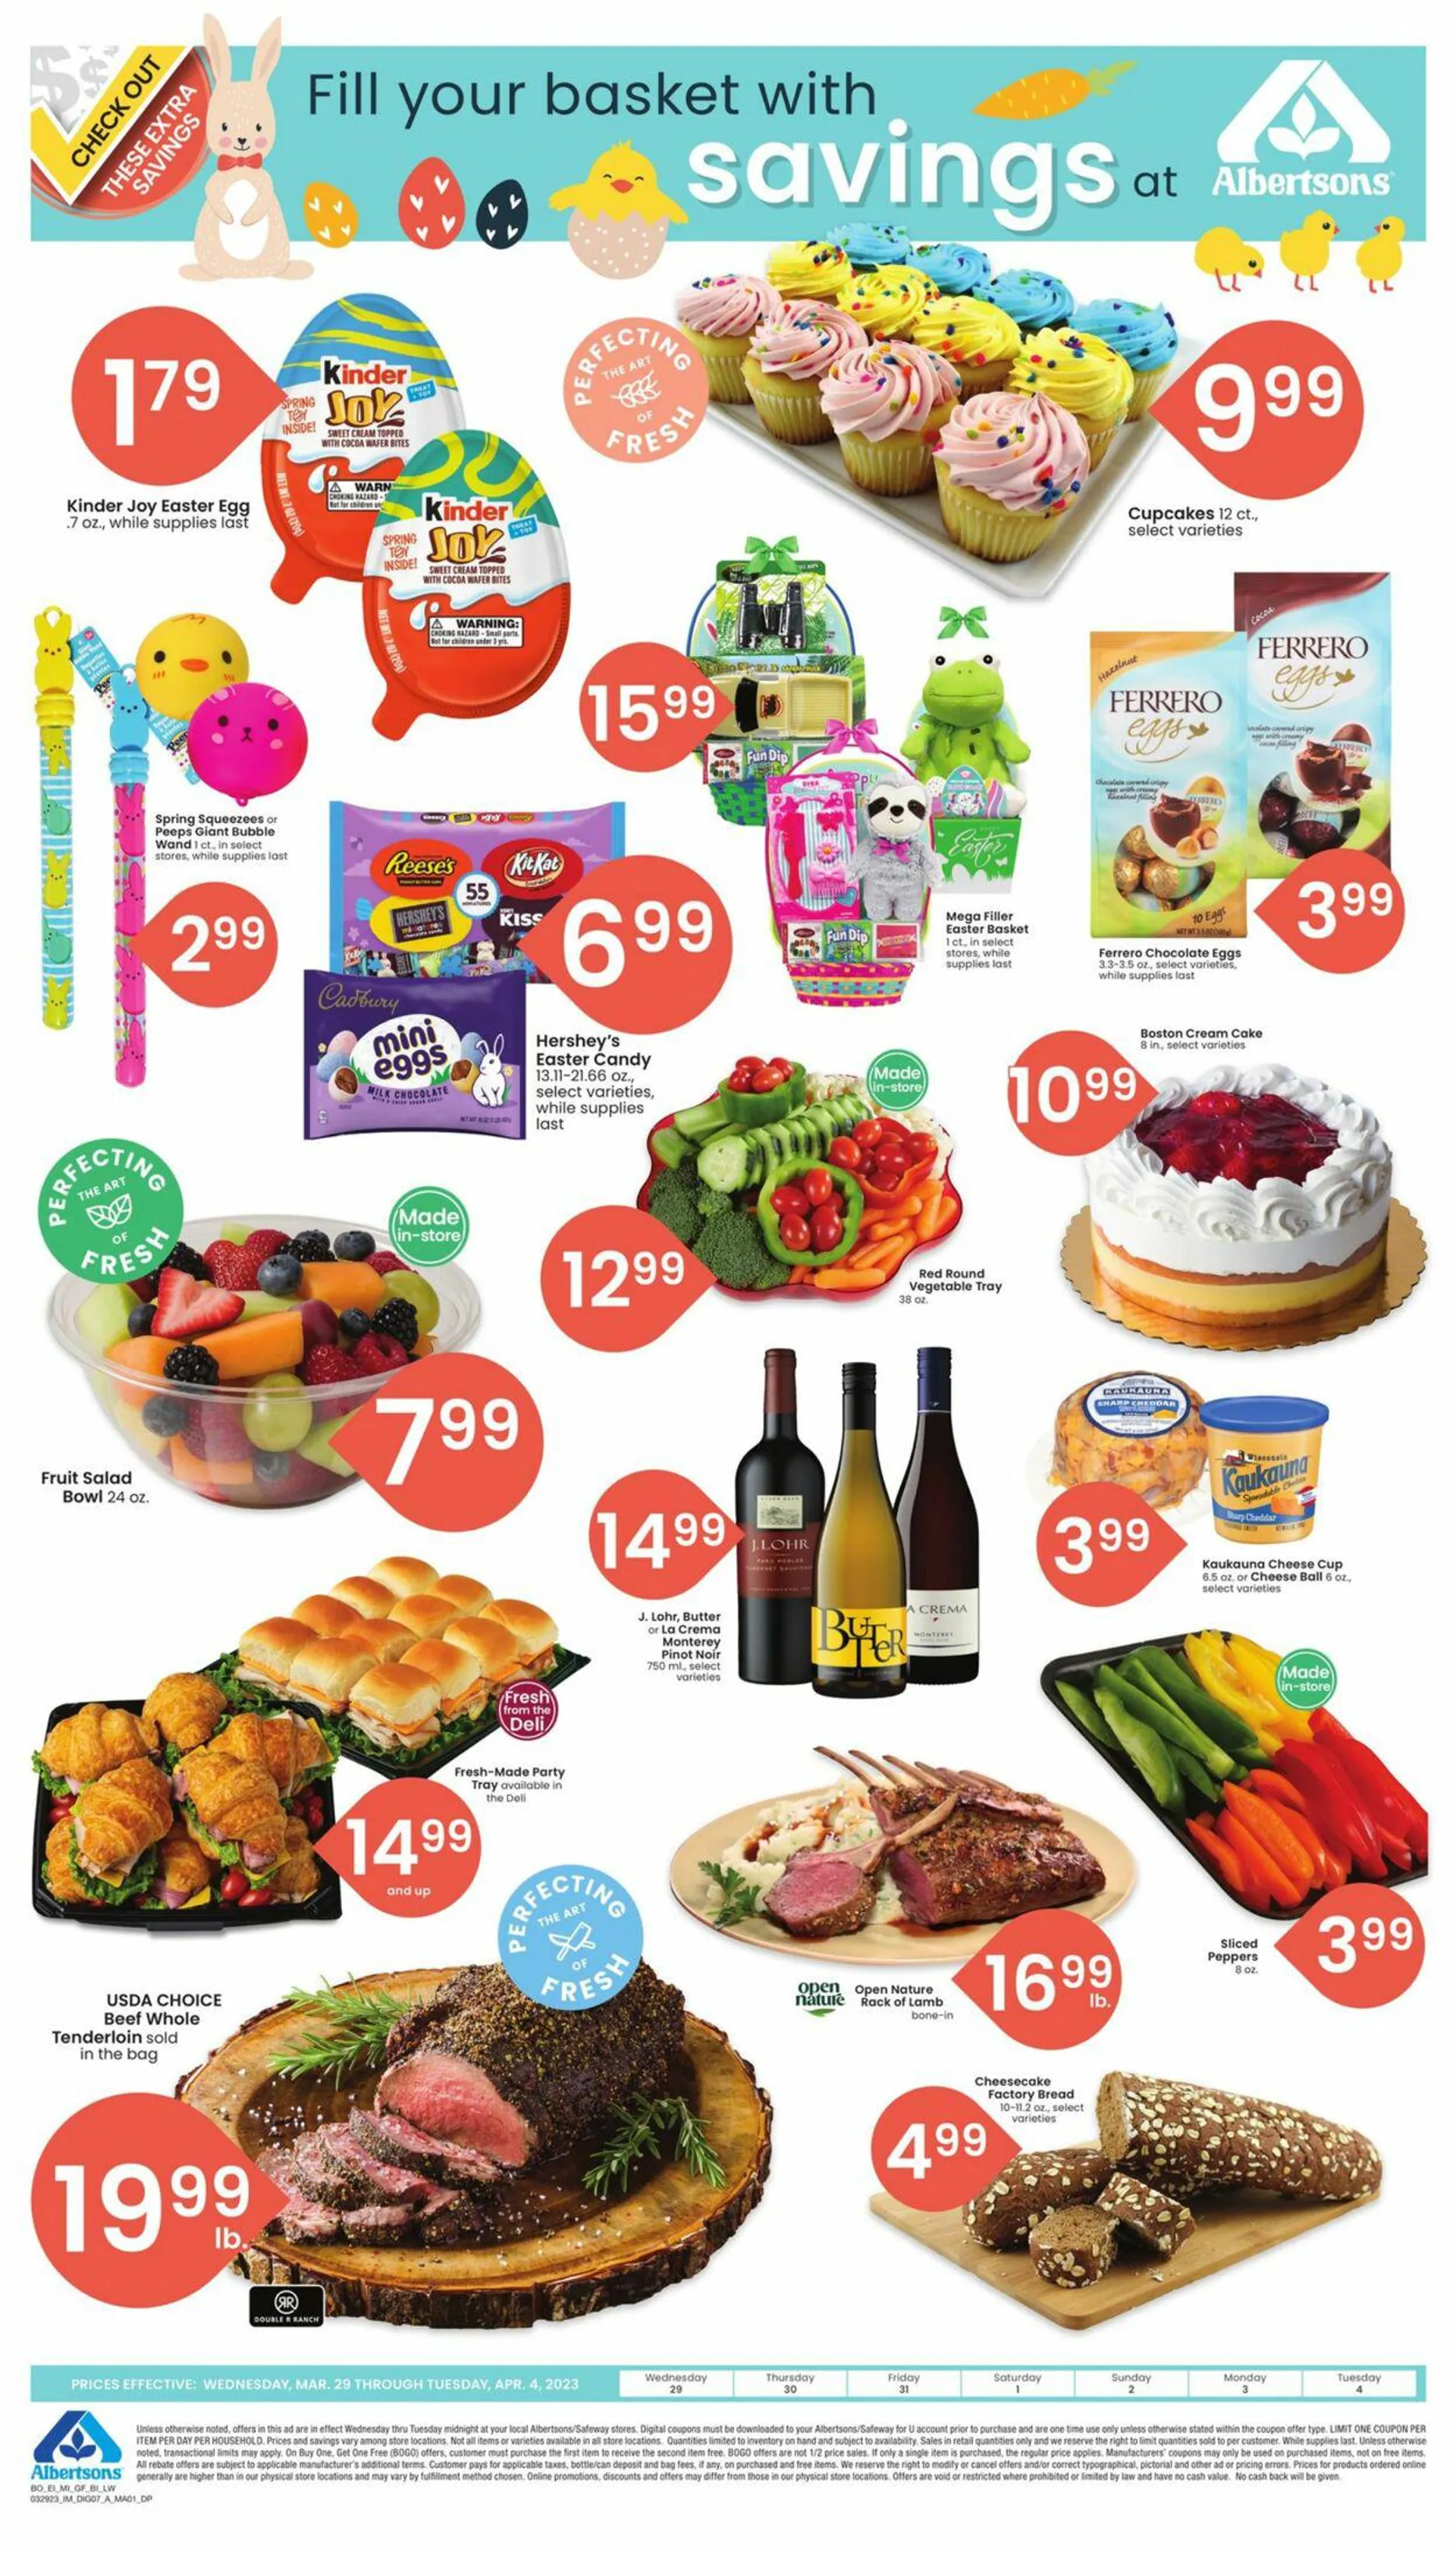 Albertsons Current weekly ad - 1